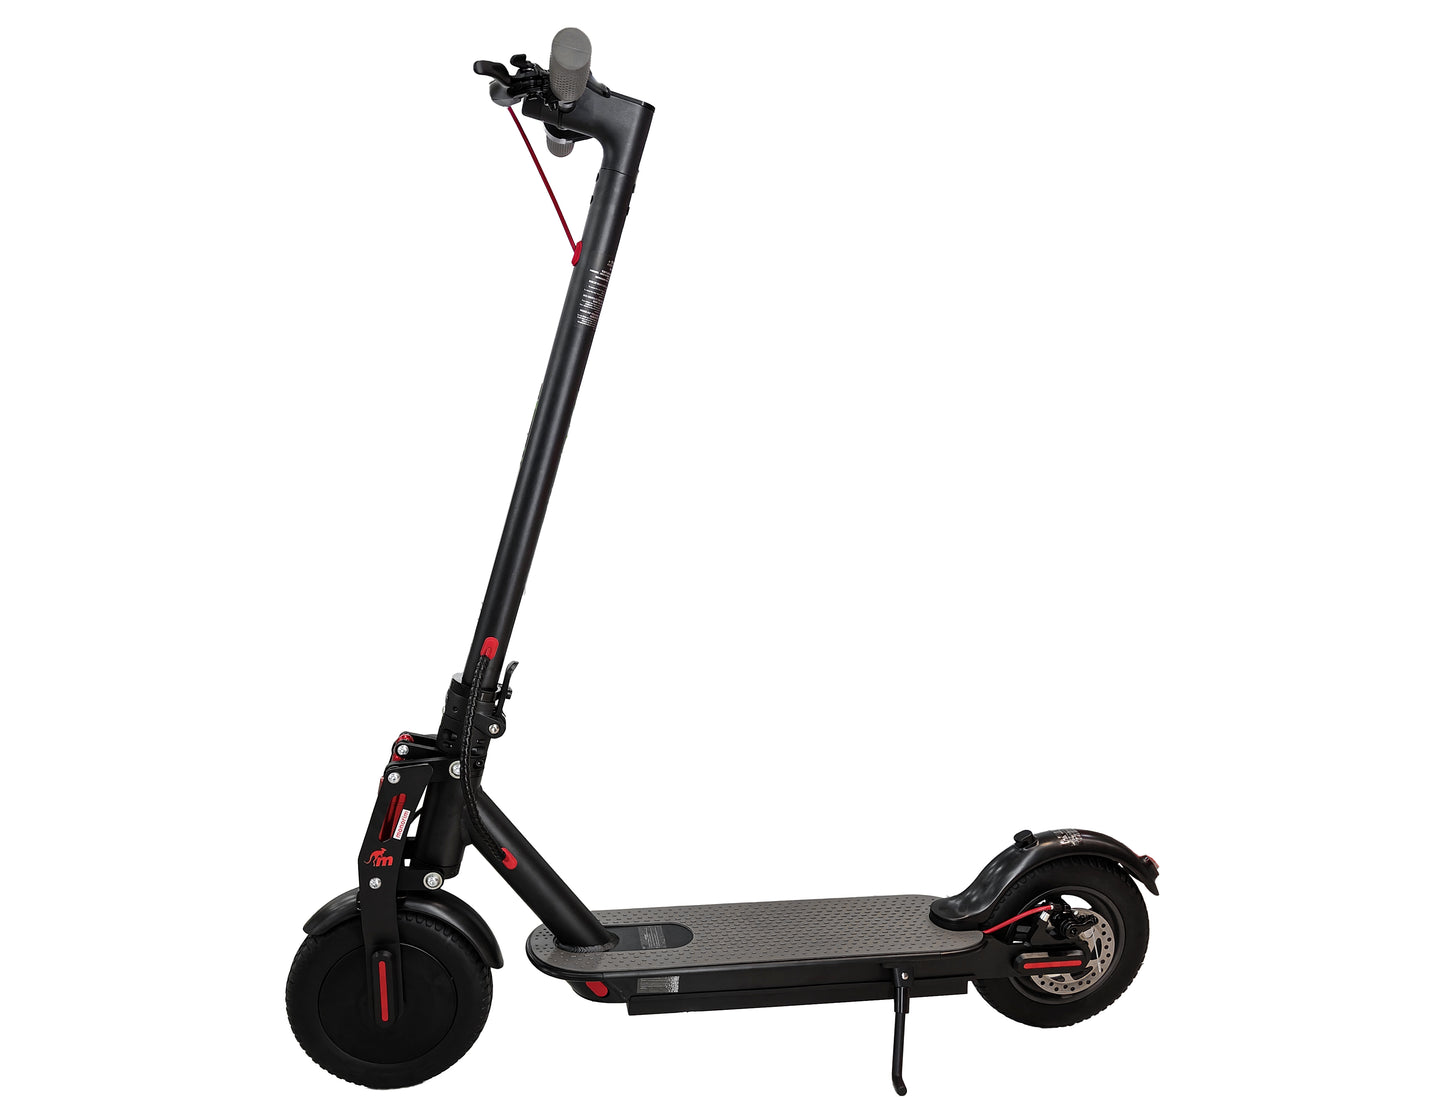 Monorim T2S Pro scooter 48v battery 14.4ah LS/NLpower 500w motor 48v controller including the front suspension(without shipcost)